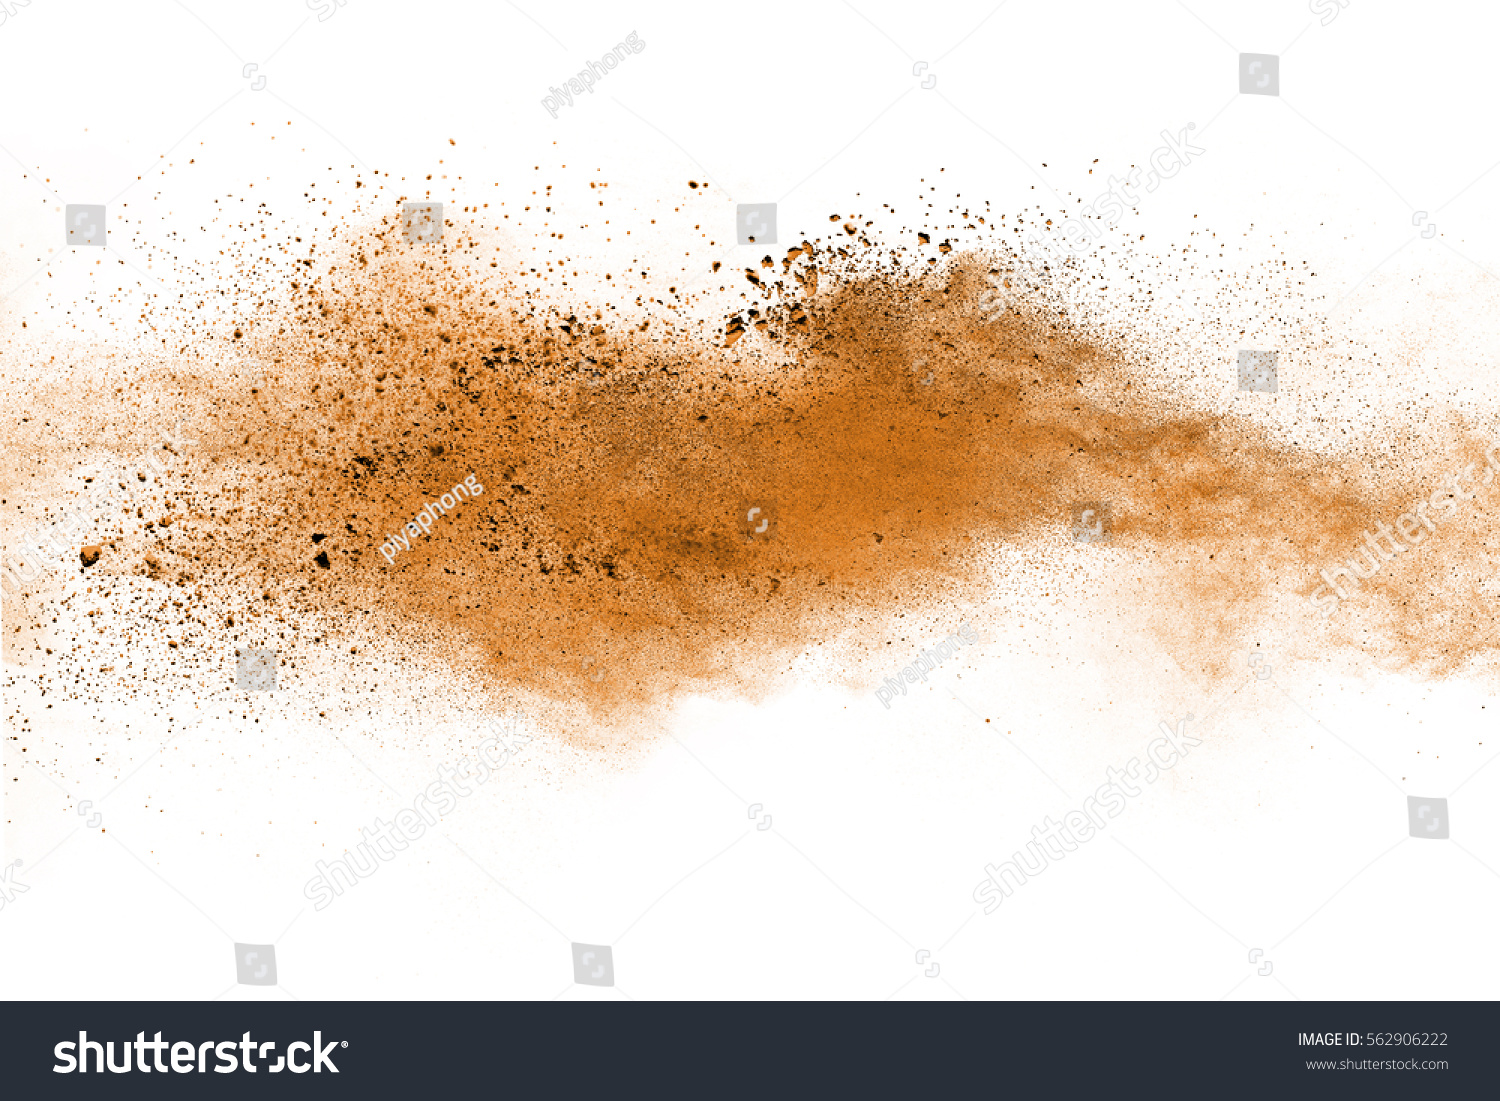 Freeze motion of brown color powder exploding on white background. #562906222